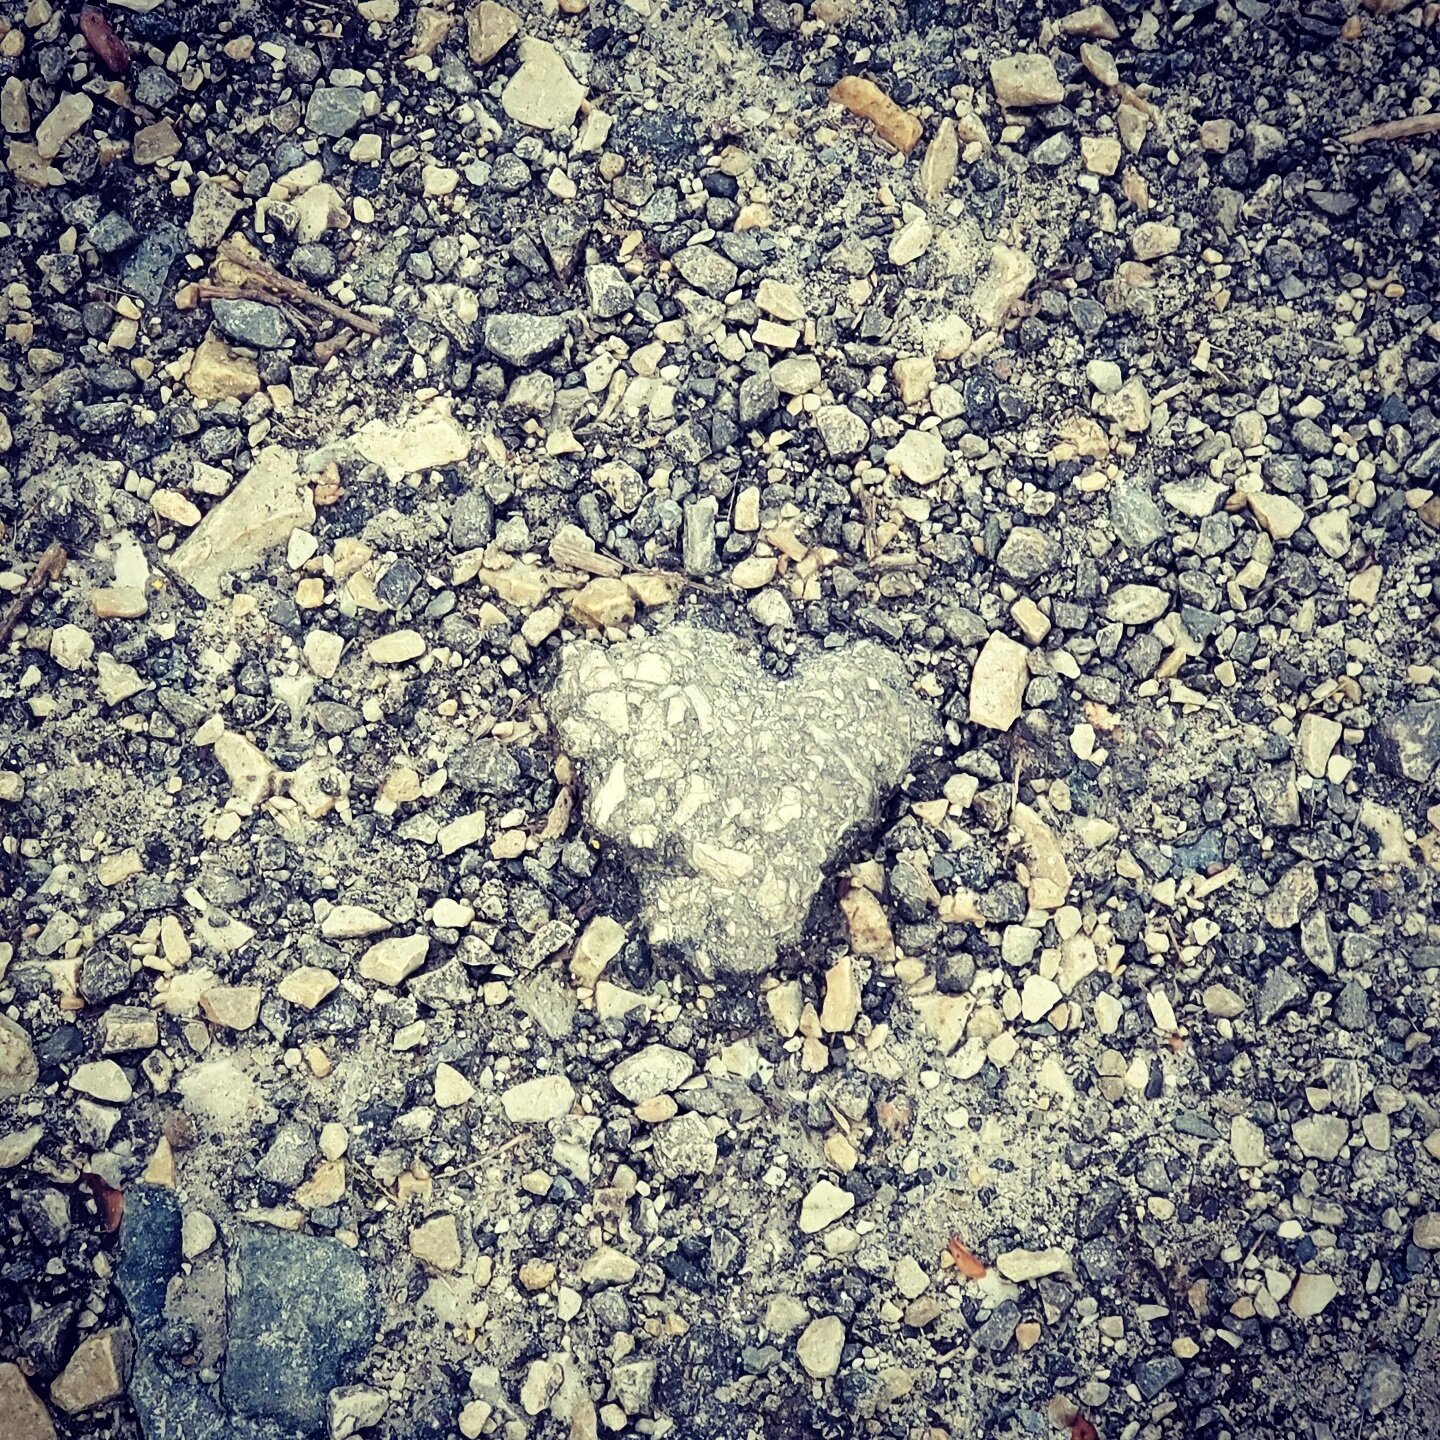 This is what is left of the wear and tear of the road..#heartoftheday #lorettashearts #sharingheart #loveisallaround #findingalittlelove #keepyourheartopen #followyourheart #findingalittlelovealongtheway #randomhearts #wheresthelove #heresthelove #wh